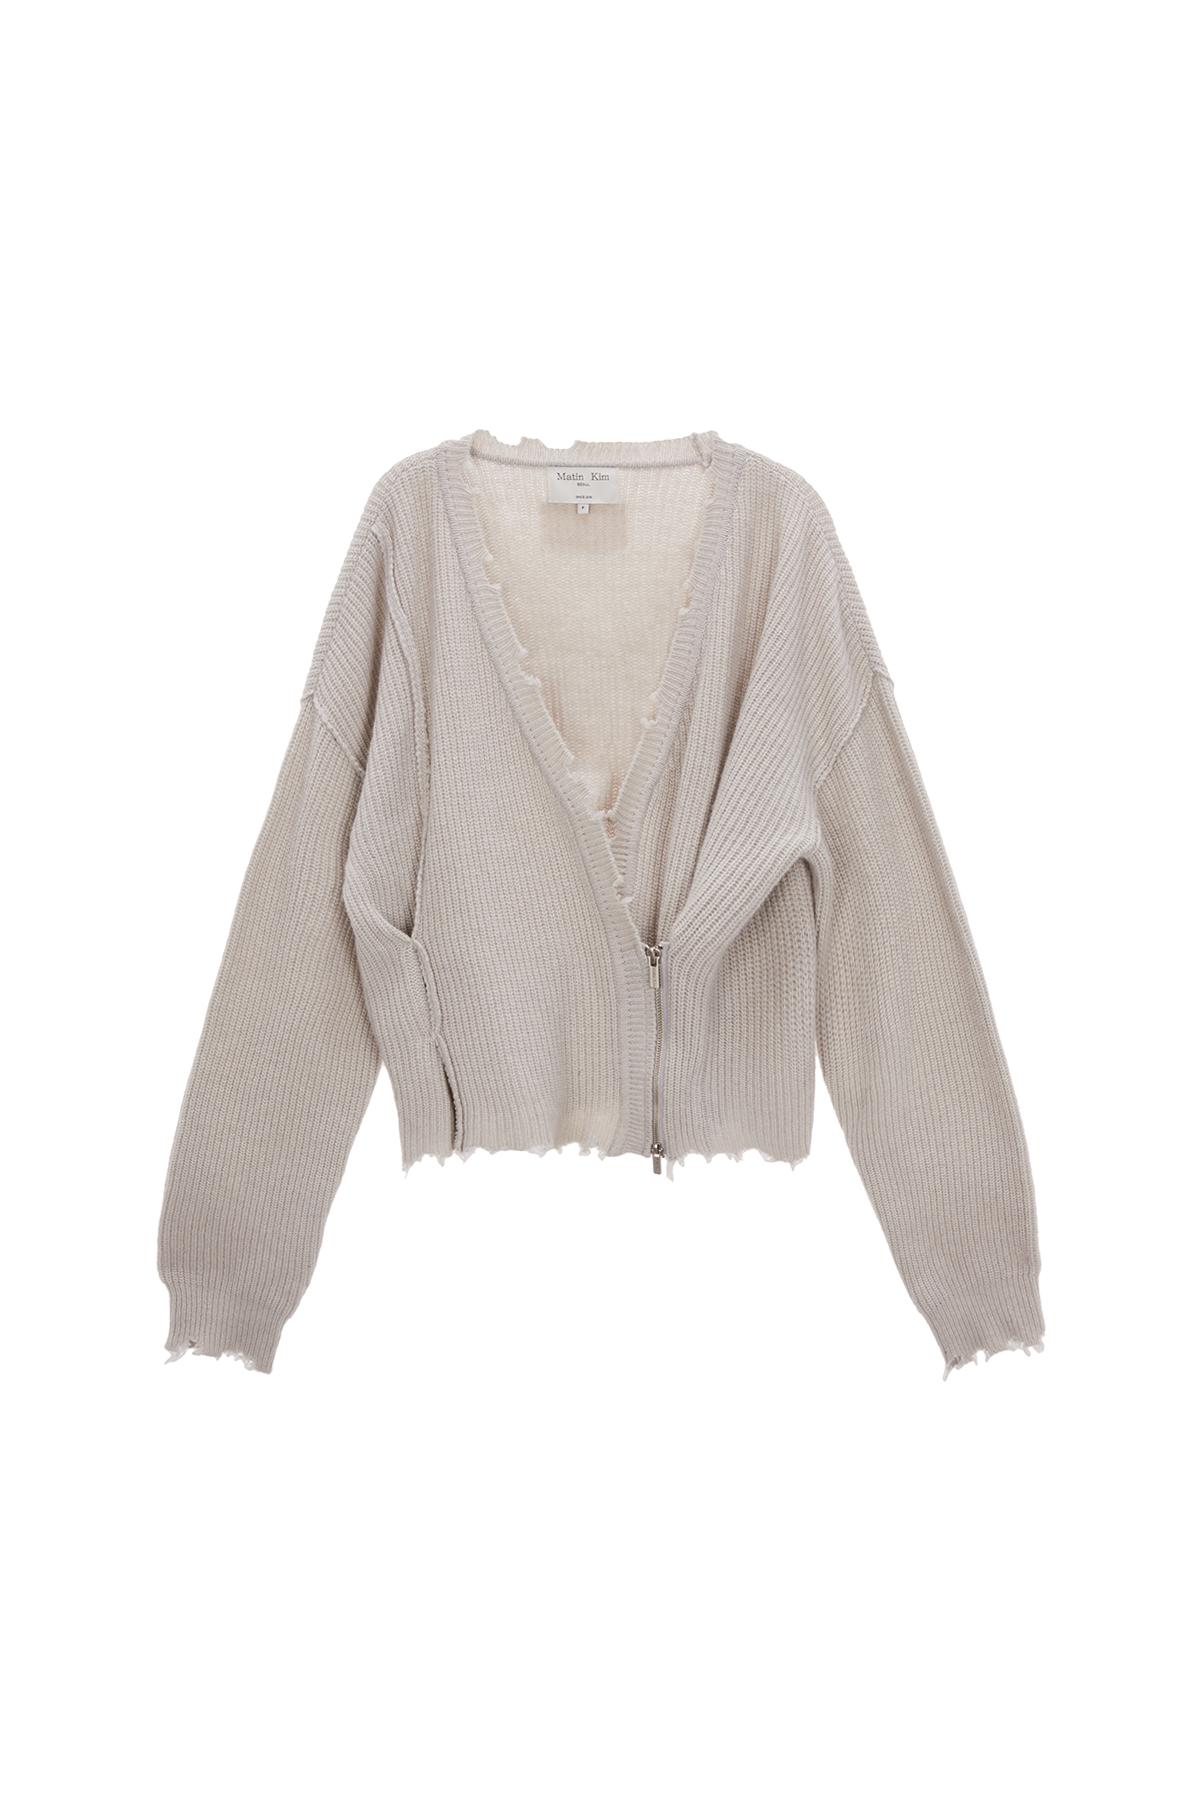 PINCHED TWO WAY KNIT ZIP CARDIGAN IN LIGHT GREY